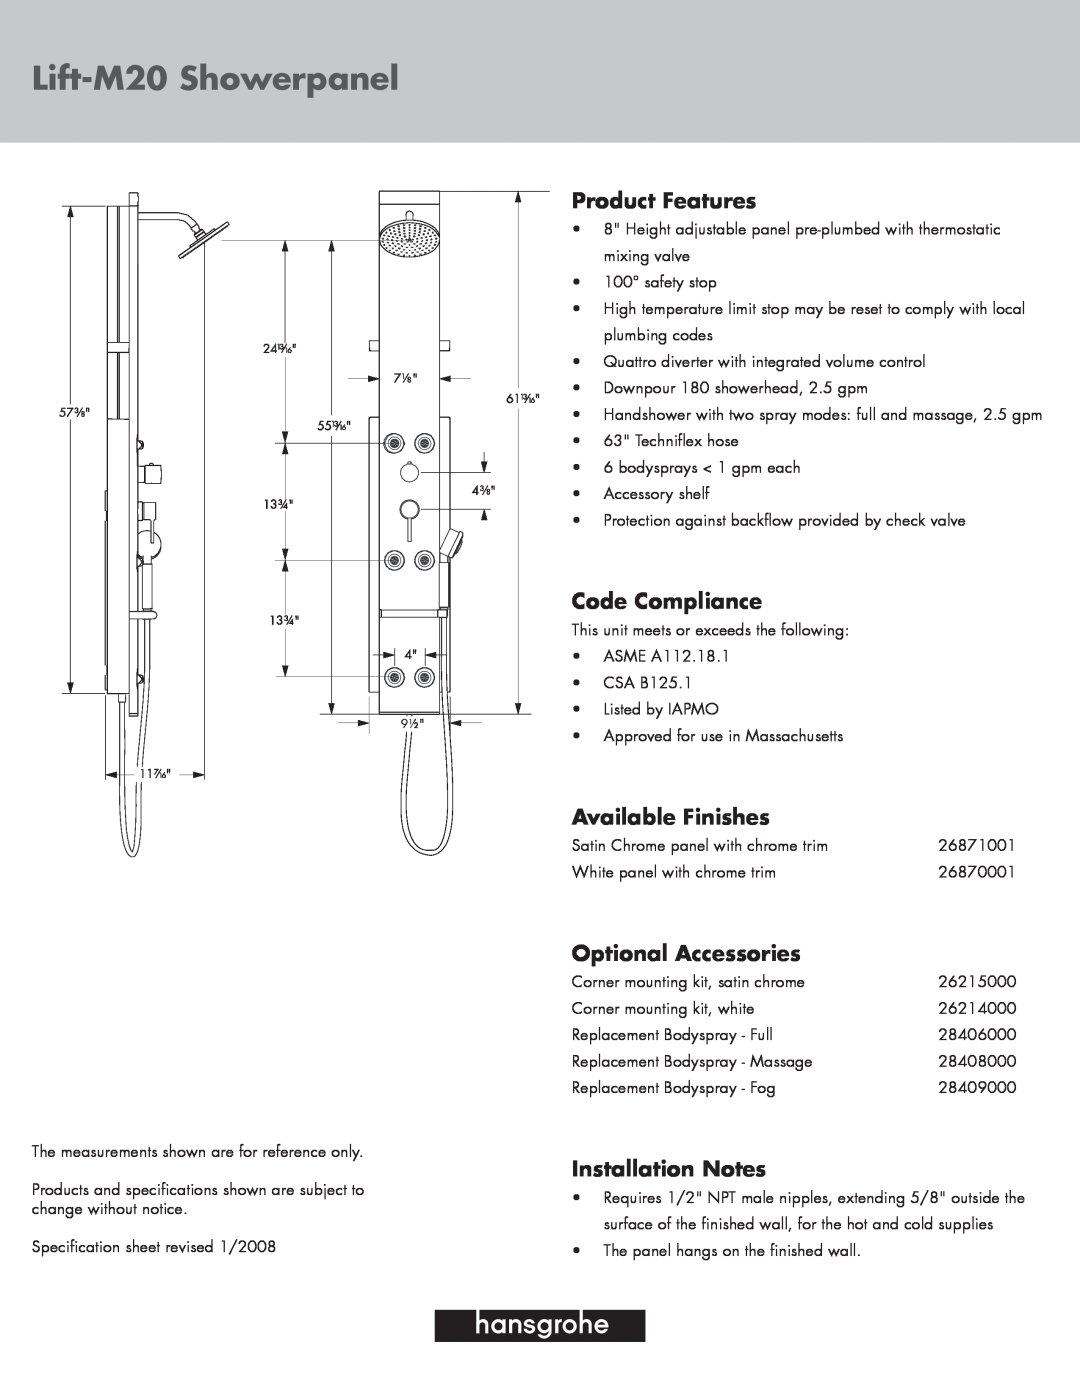 Hans Grohe specifications Lift-M20 Showerpanel, Product Features, Code Compliance, Available Finishes 